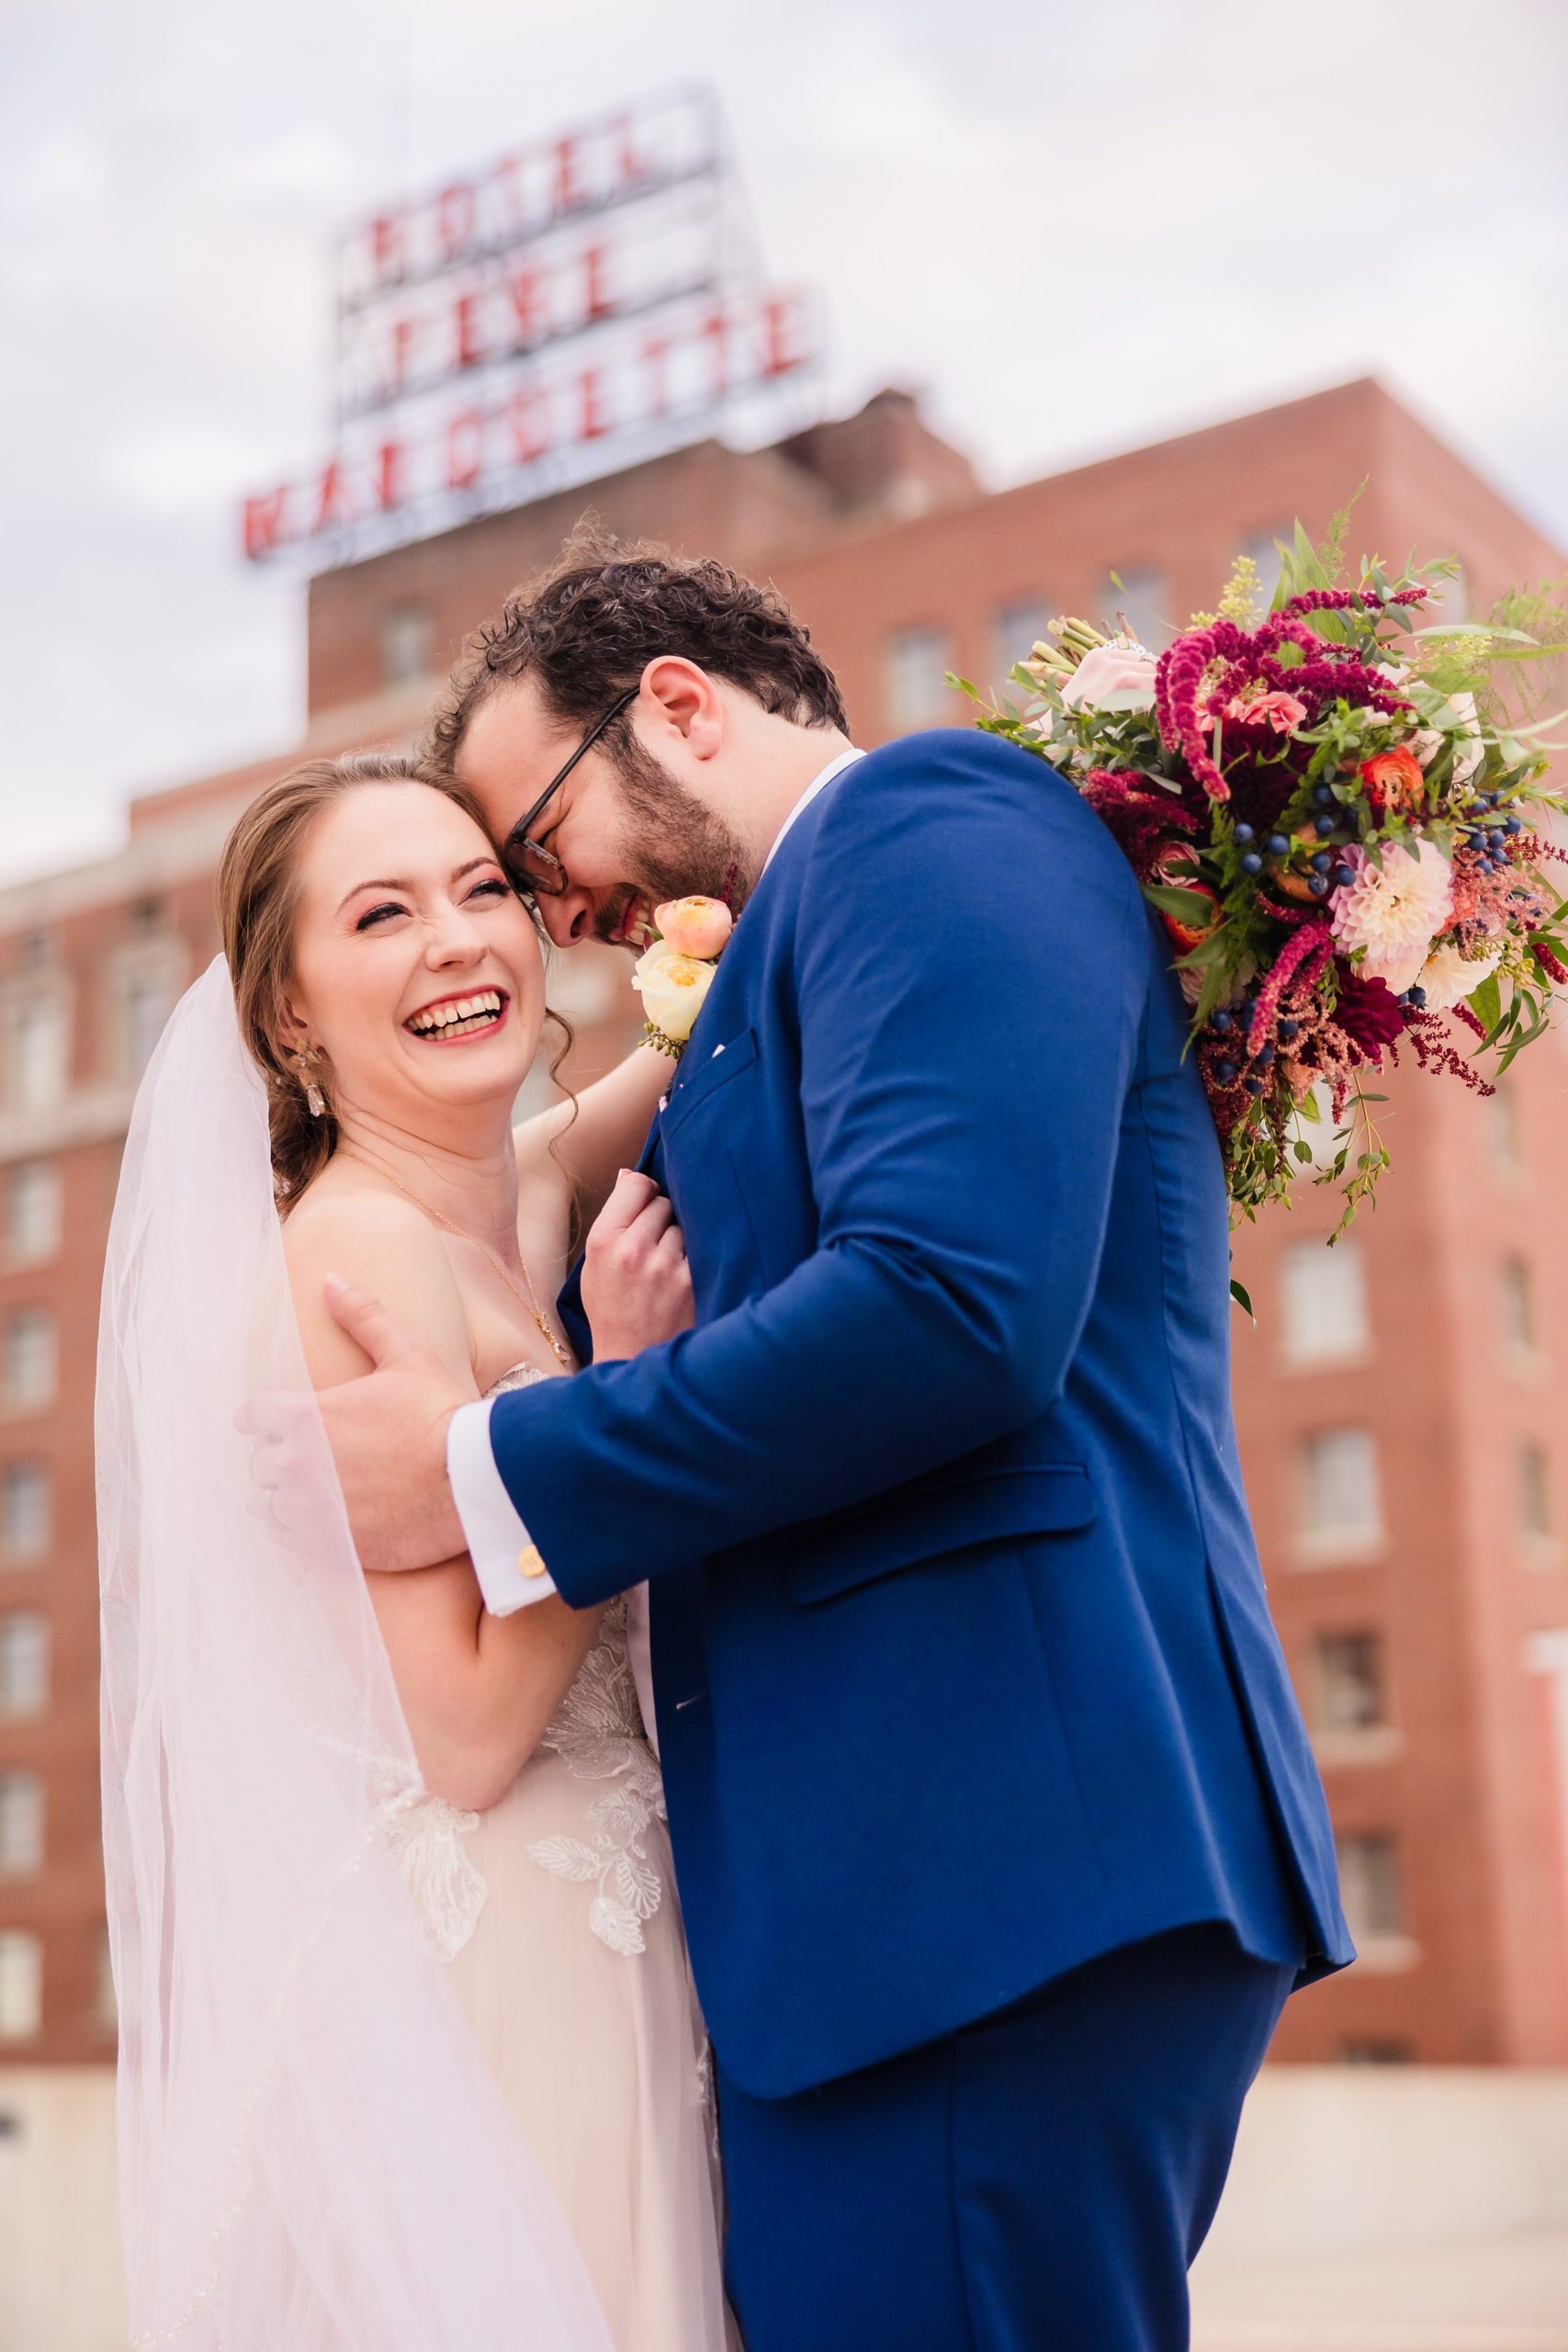 Bride and groom celebrate getting married at the Hotel Pere Marquette in Peoria, Illinois.